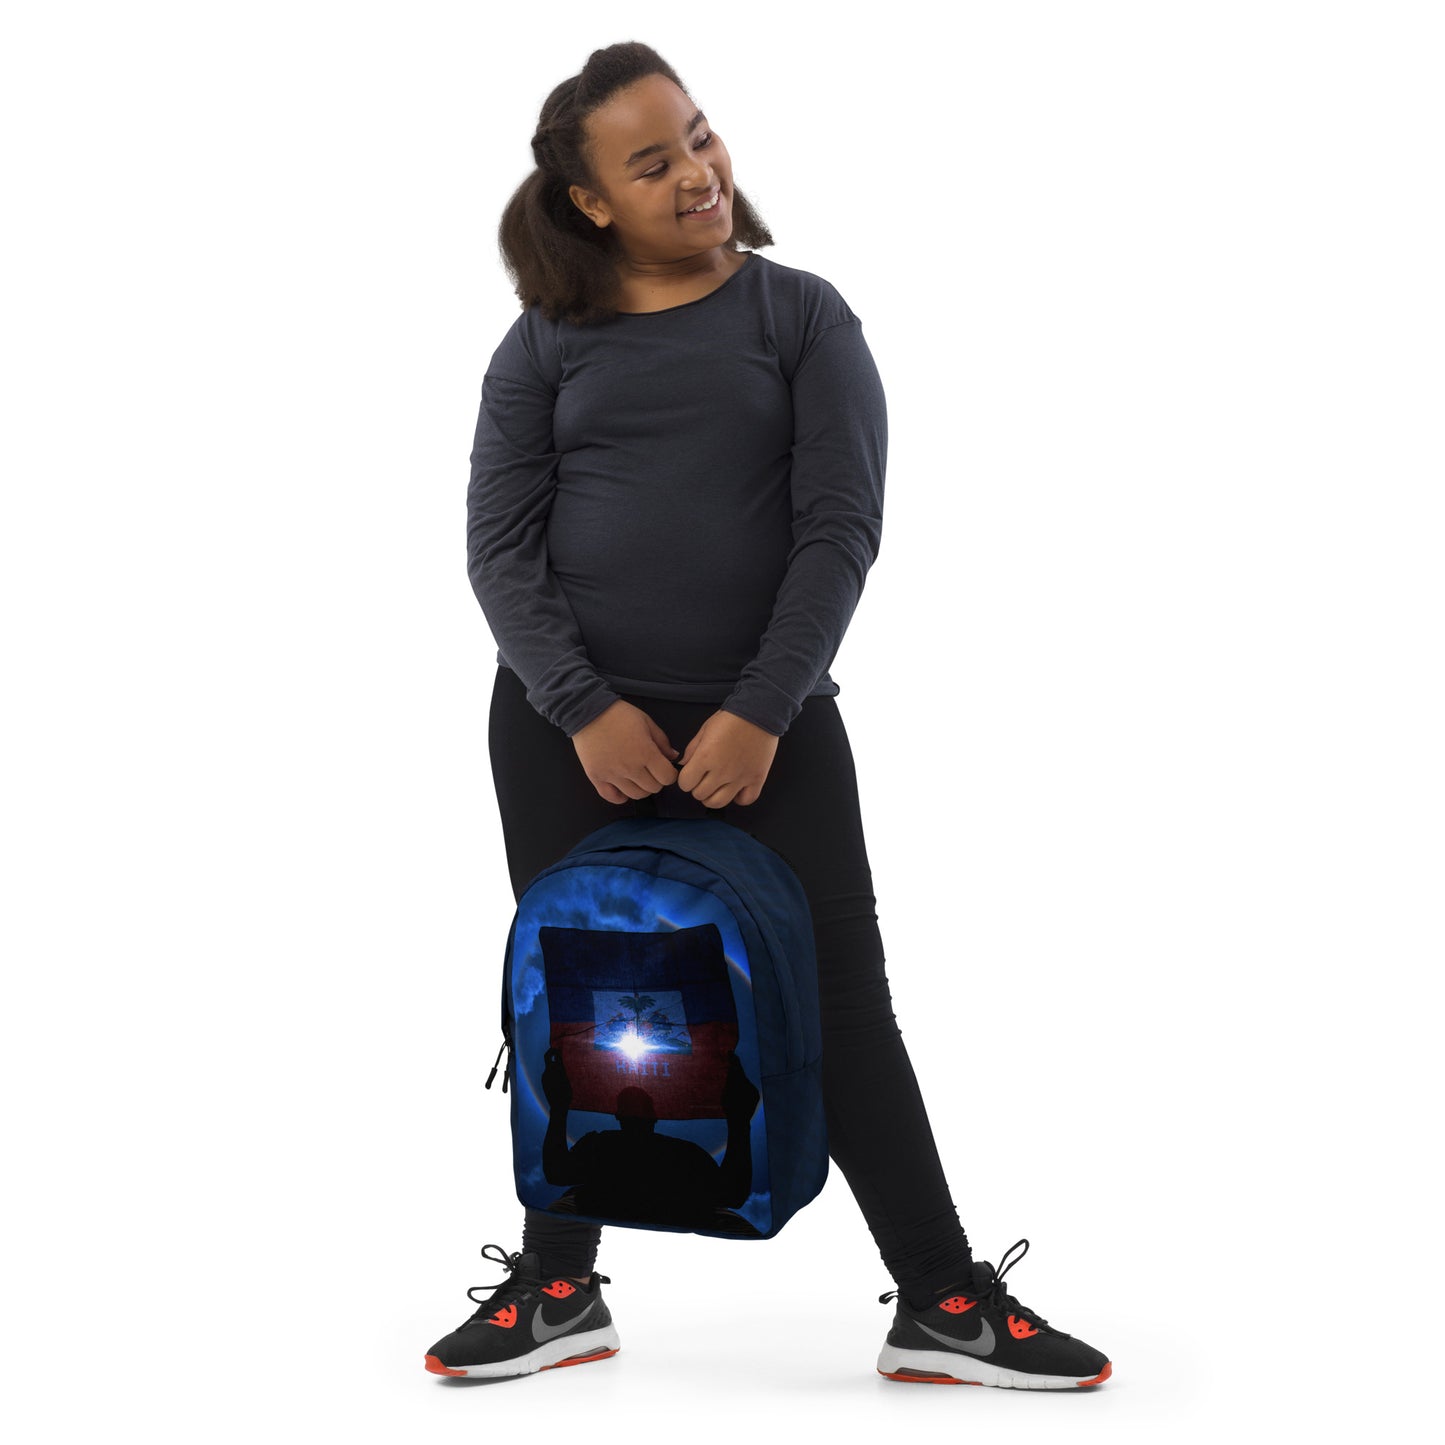 Minimalist Backpack ( The Halo Collection )